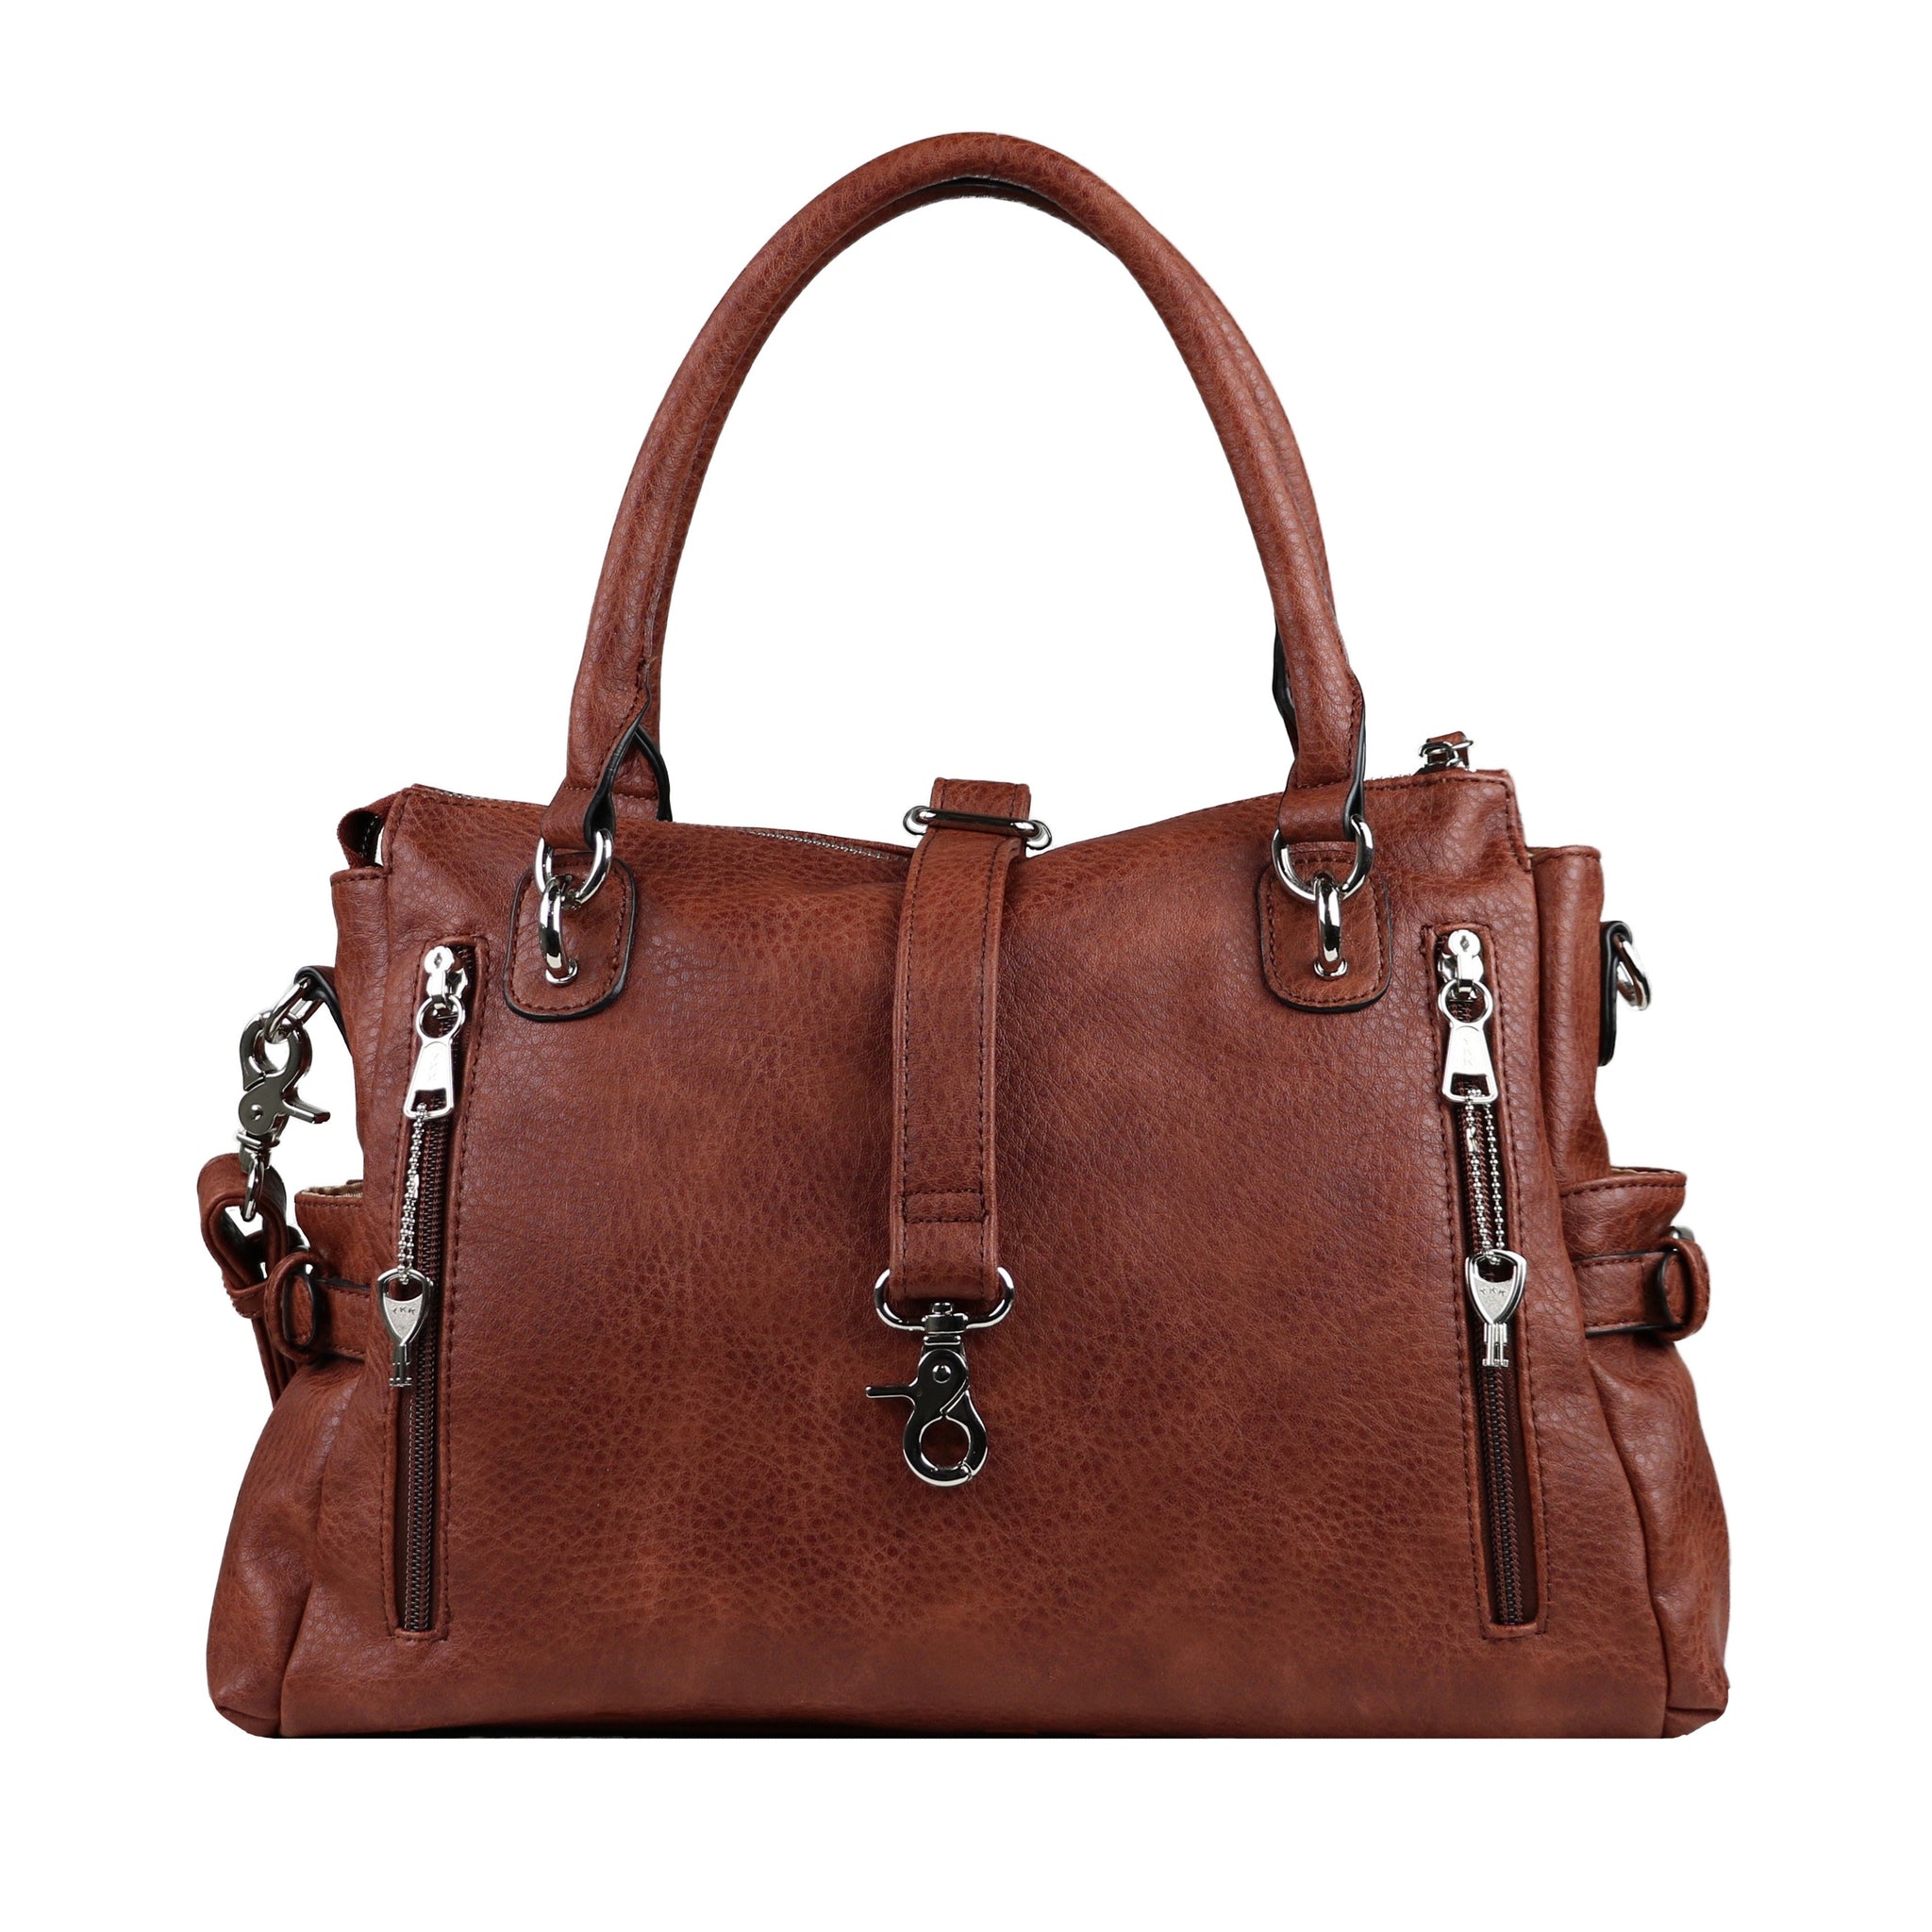 Jessica Satchel – Mama Bear's Concealed Carry